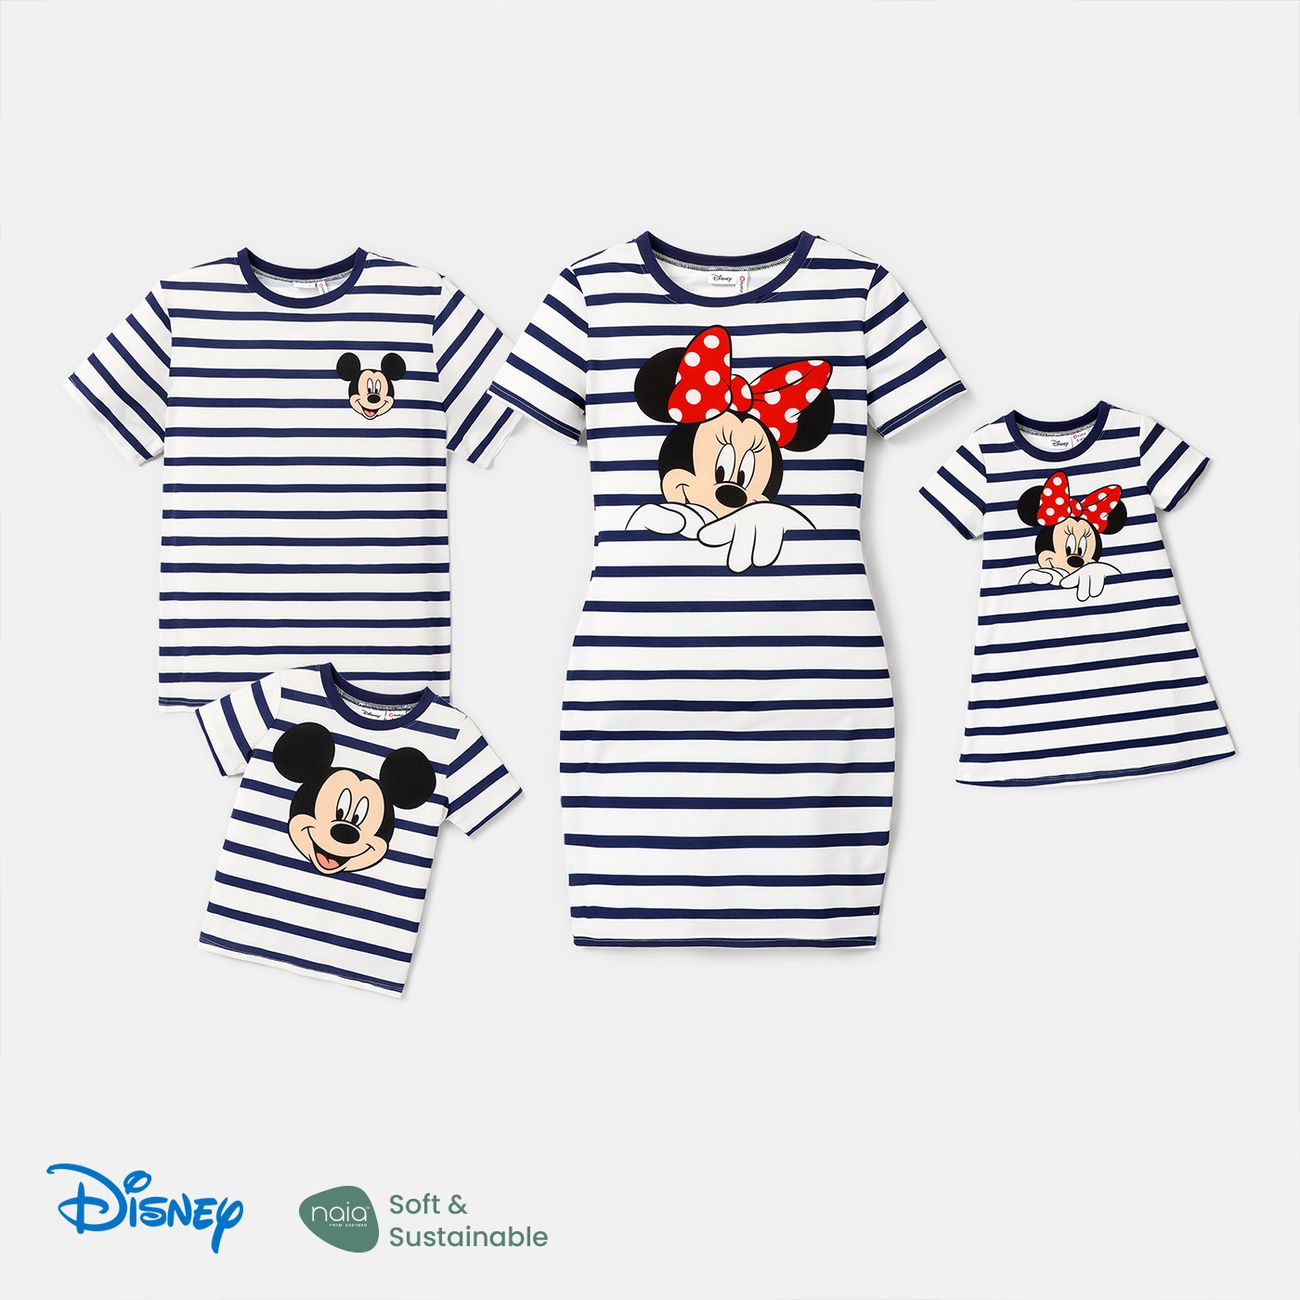 Cartoon Dog Family Portrait Matching Outfits For Mother, Daughter, And Kids  Cute T Shirt Dress And Pants Set 230427 From Zhao08, $13.19